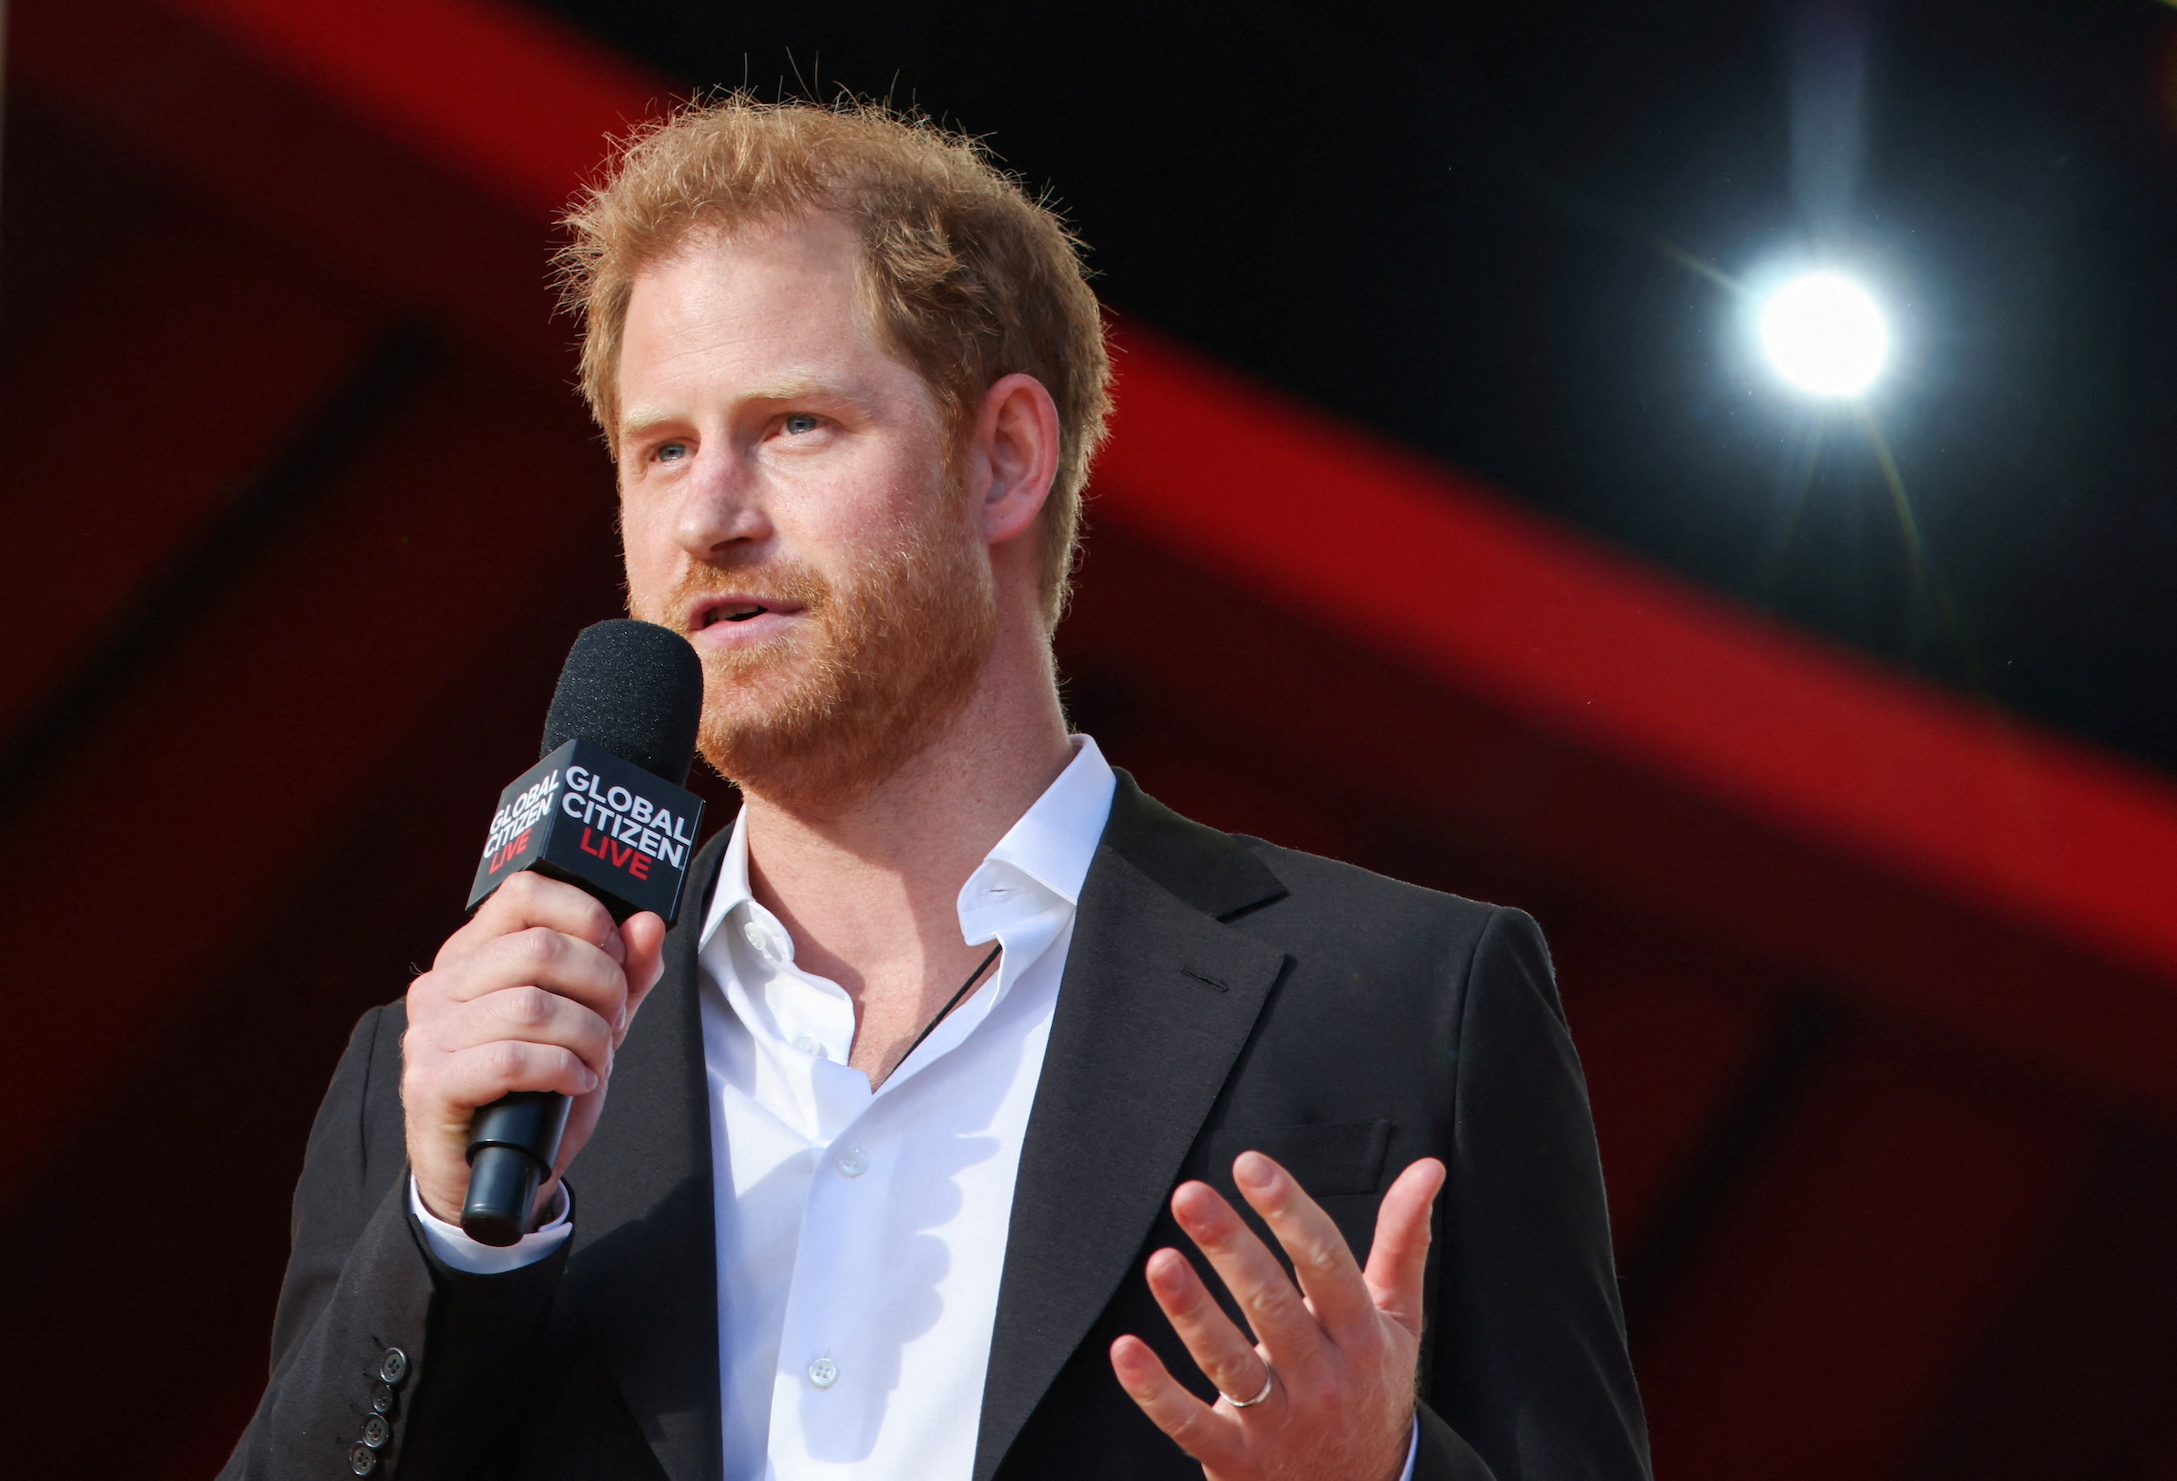 Britain’s Prince Harry vows to finish late mother Diana’s HIV work